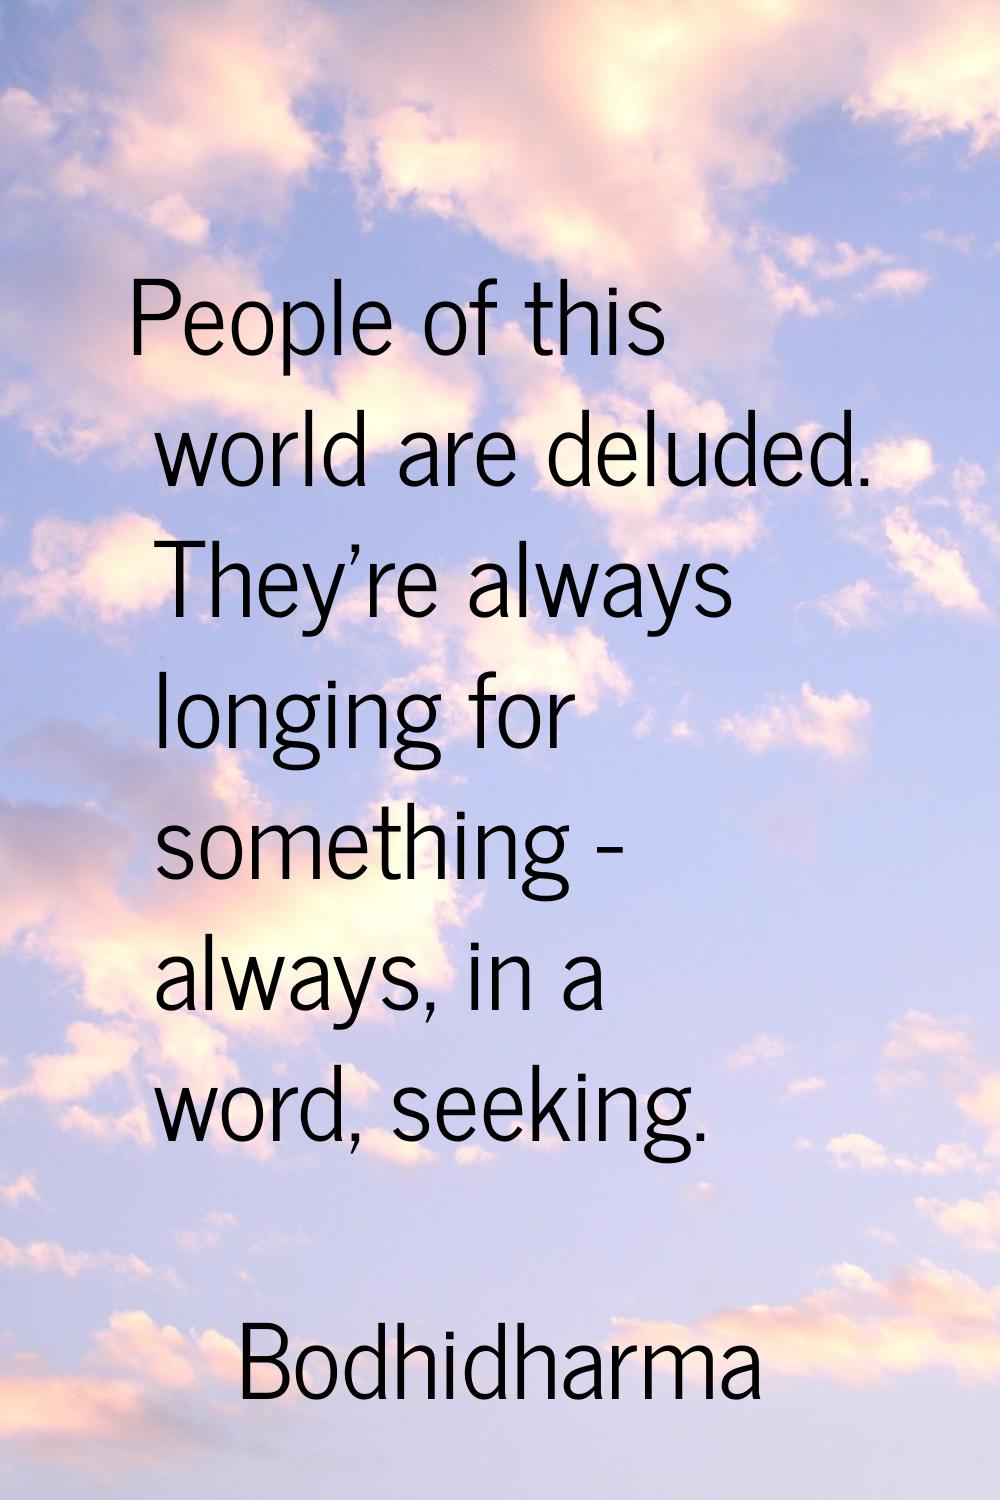 People of this world are deluded. They're always longing for something - always, in a word, seeking